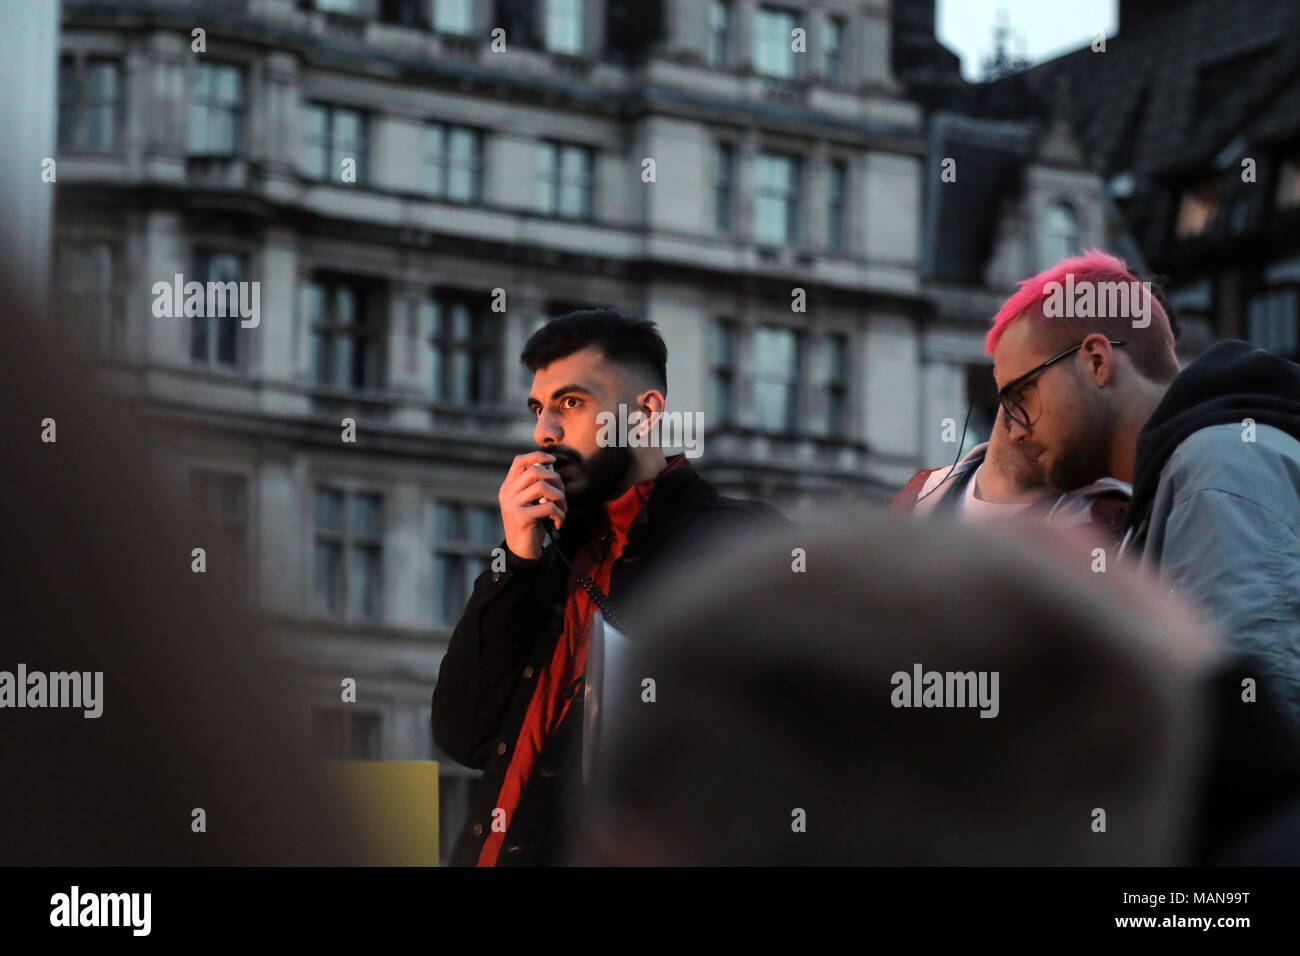 Shahmir Sanni, a volunteer on the pro-Brexit referendum campaign, speaking at the Fair Vote rally in Parliament Square, London on 29 March, 2018 Stock Photo